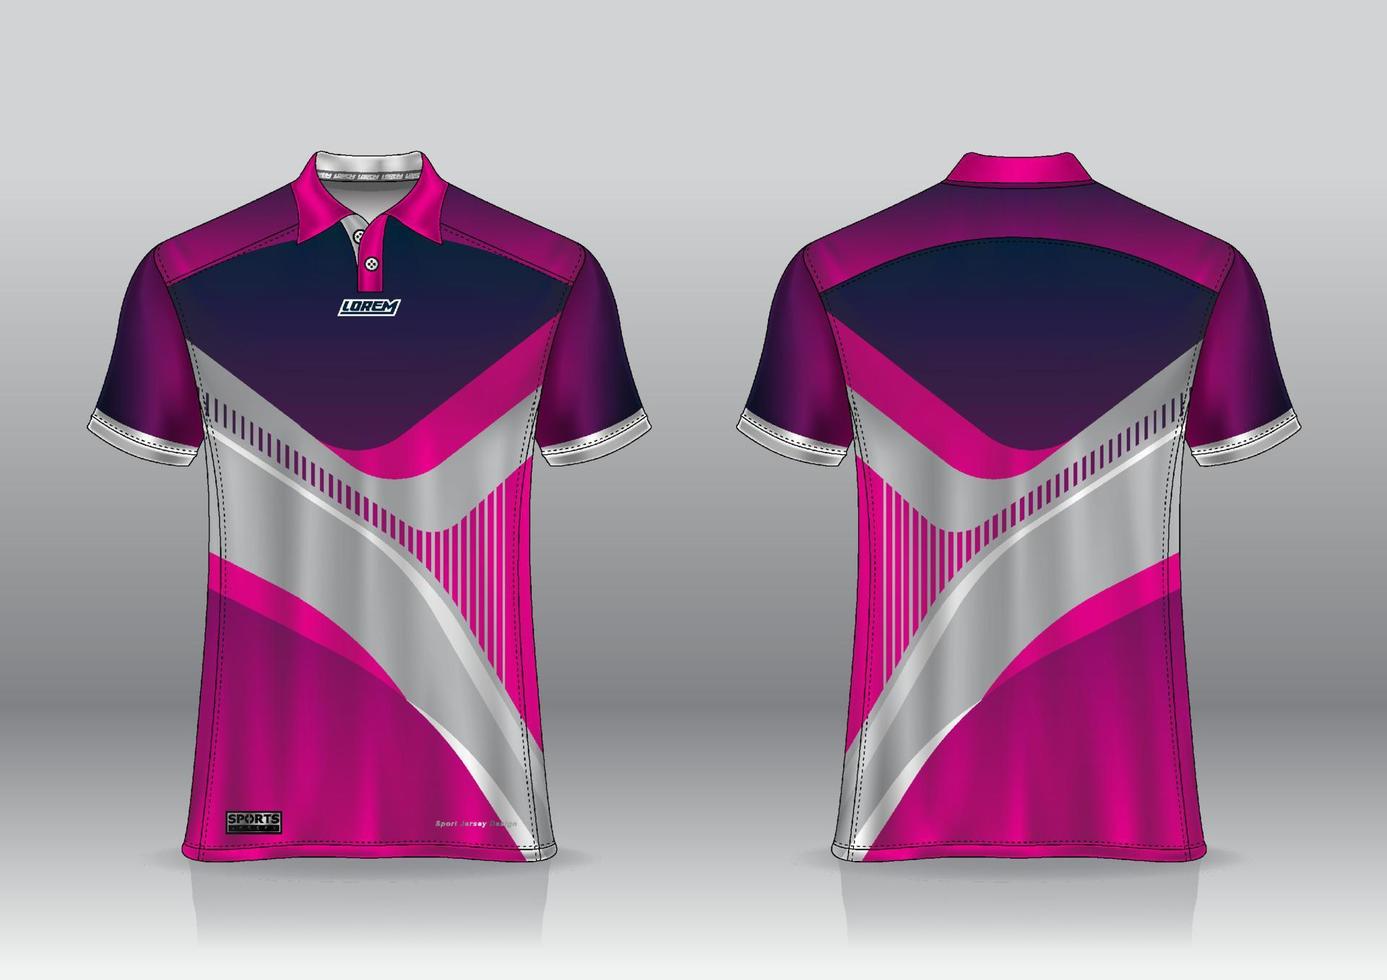 Polo shirt uniform design, can be used for badminton, golf in front view, back view. jersey mockup Vector, design premium very simple and easy to customize vector